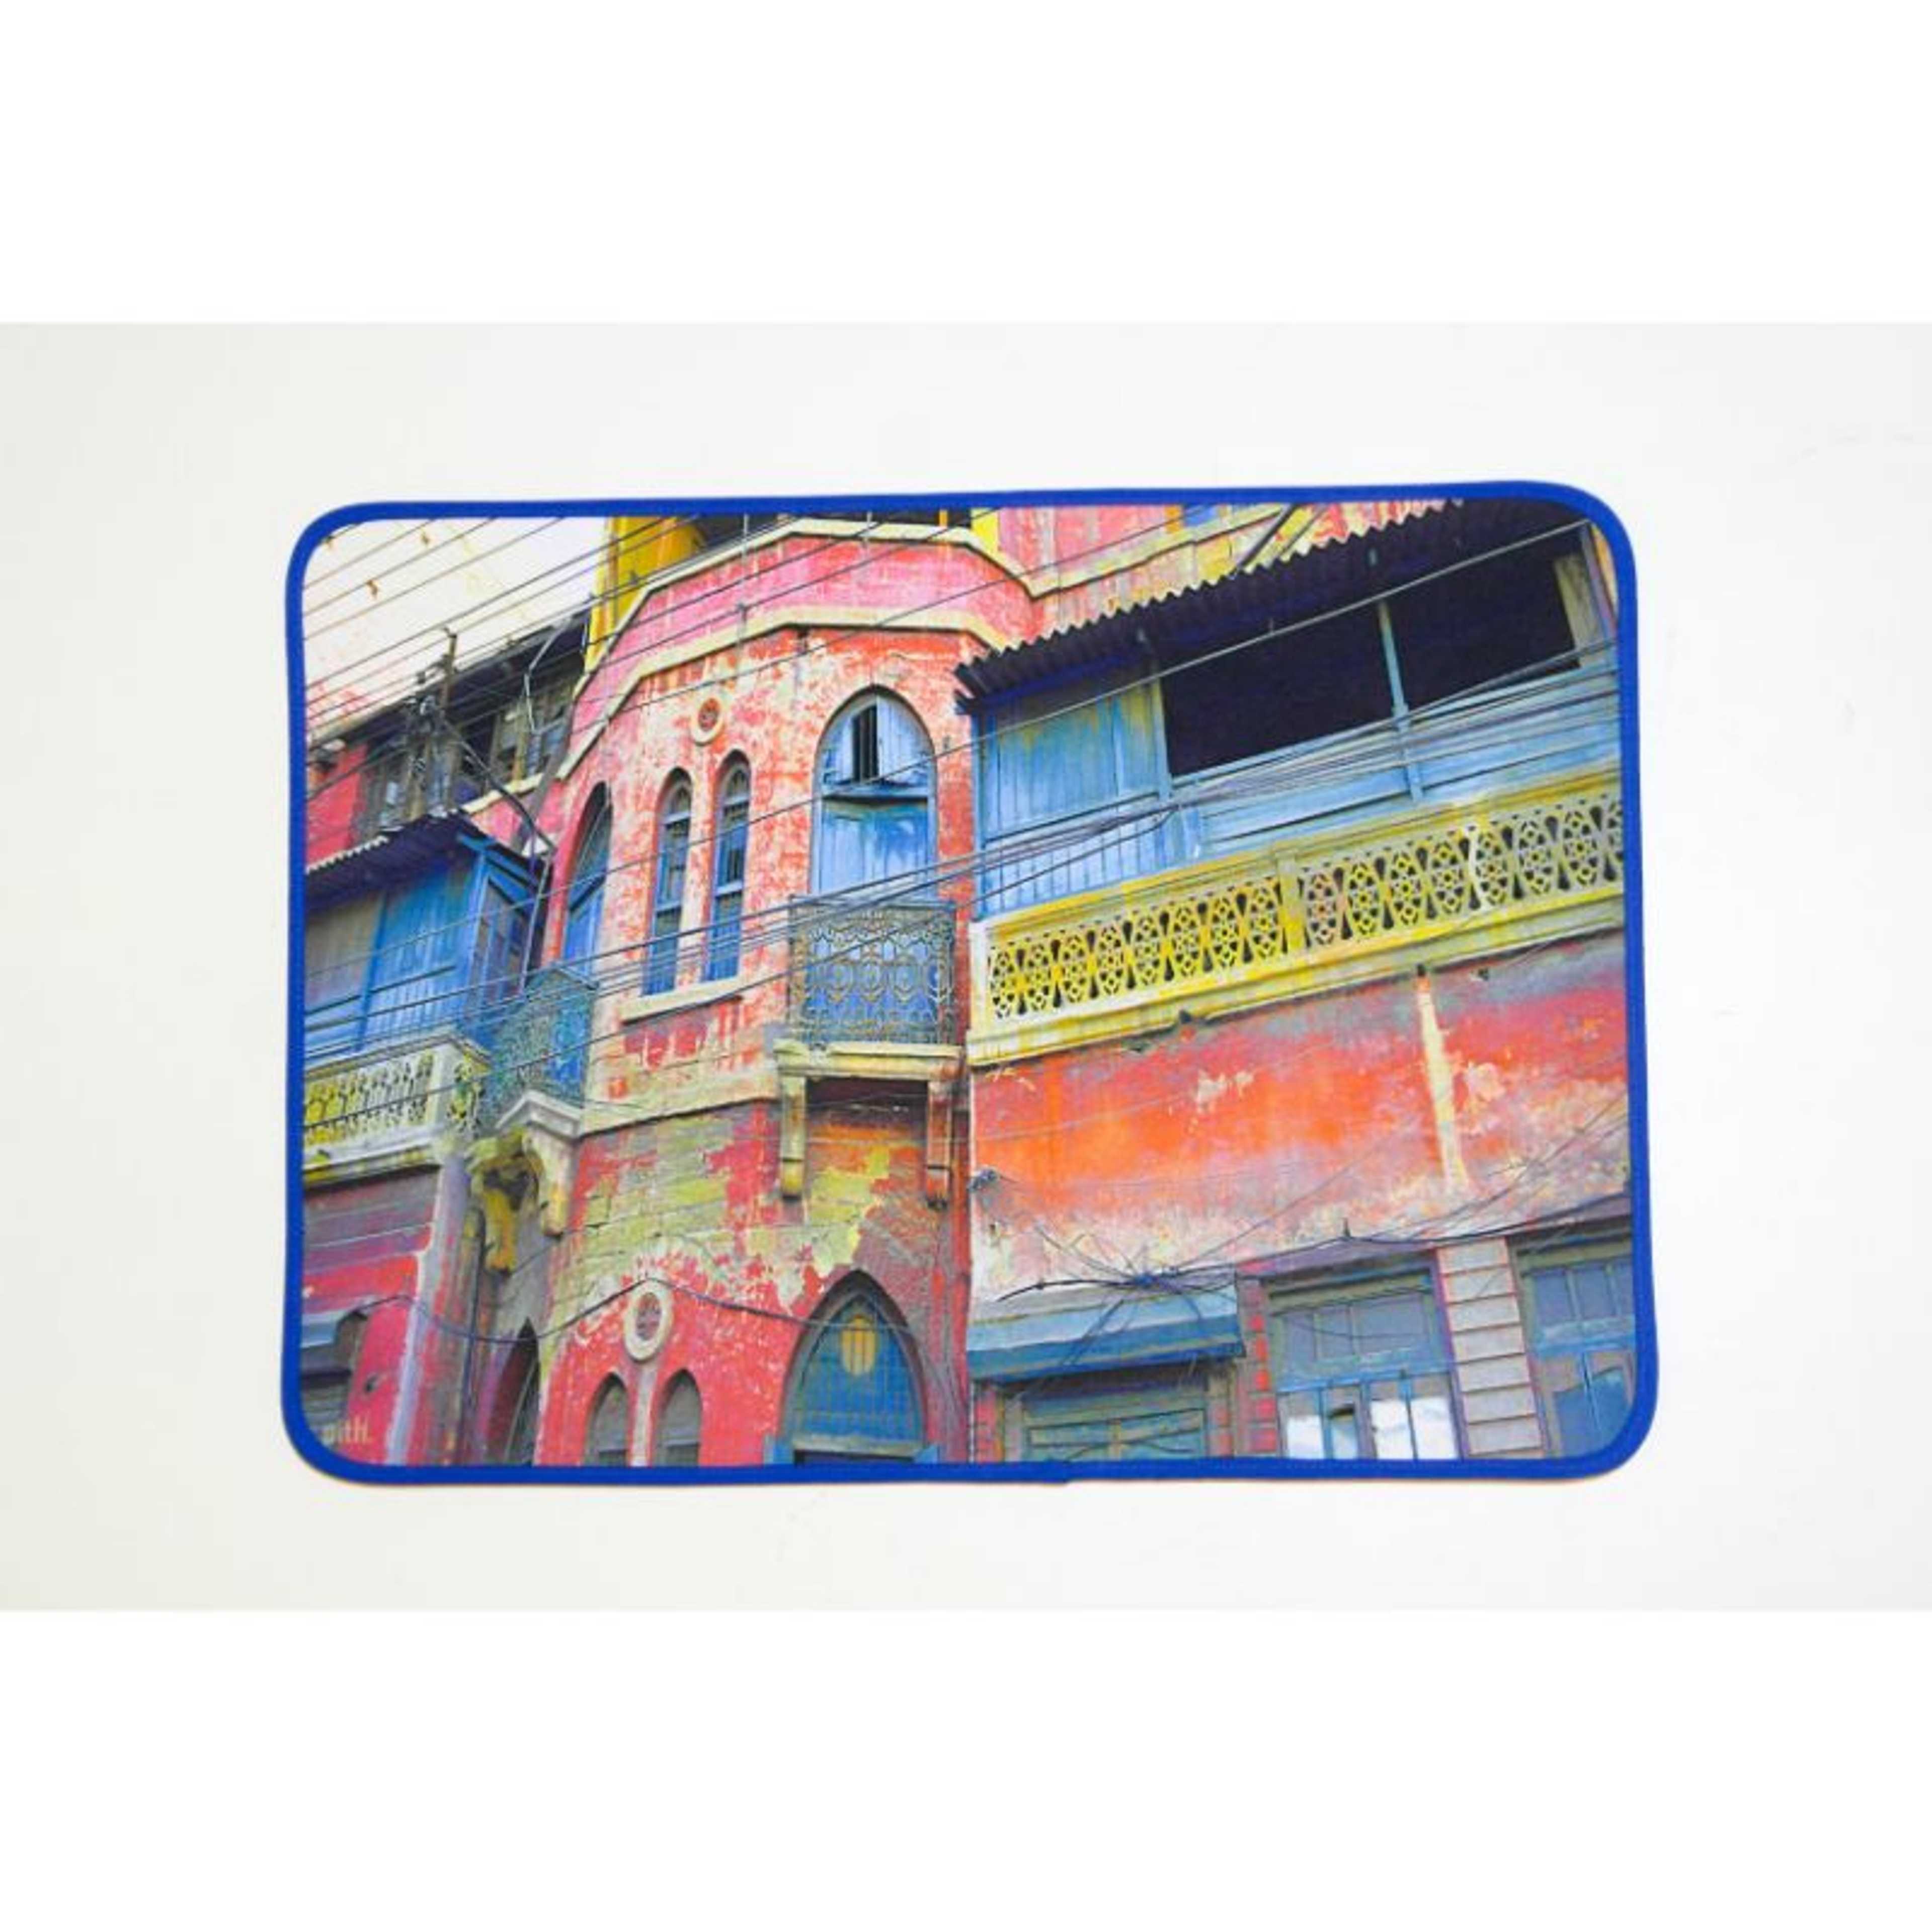 THE RED BLUE BUILDING - TABLE MAT